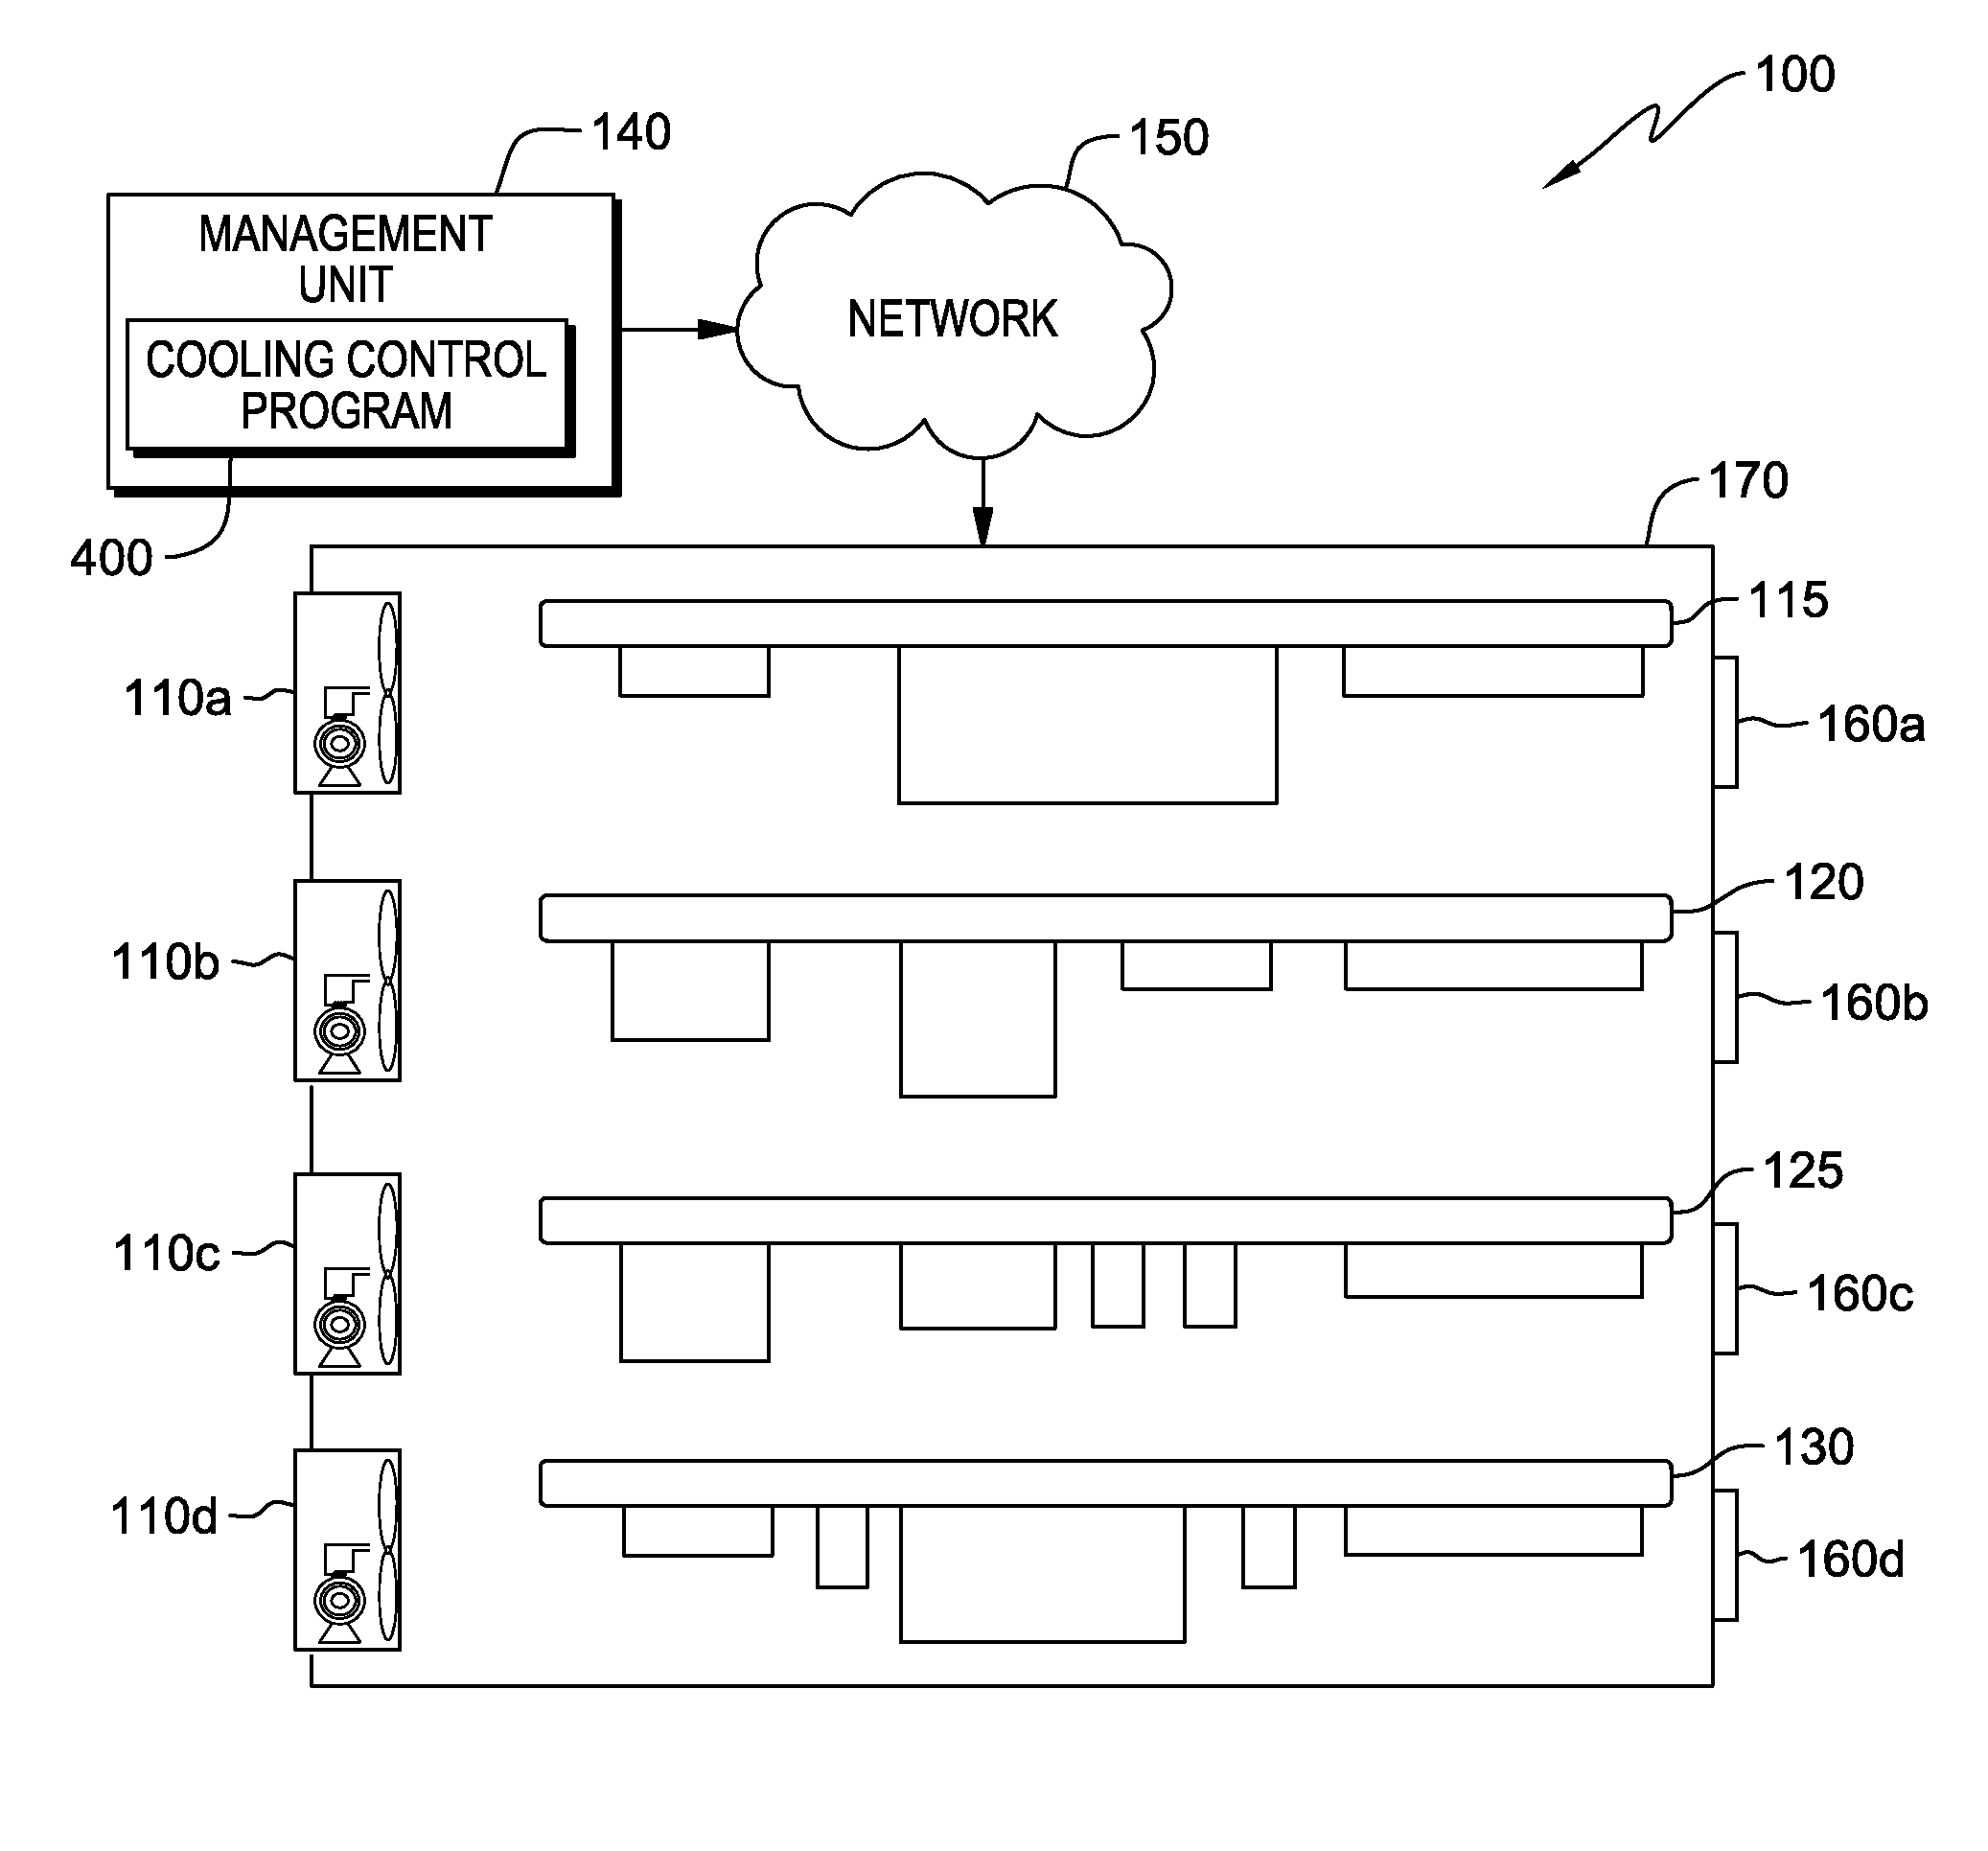 Air flow detection and correction based on air flow impedance